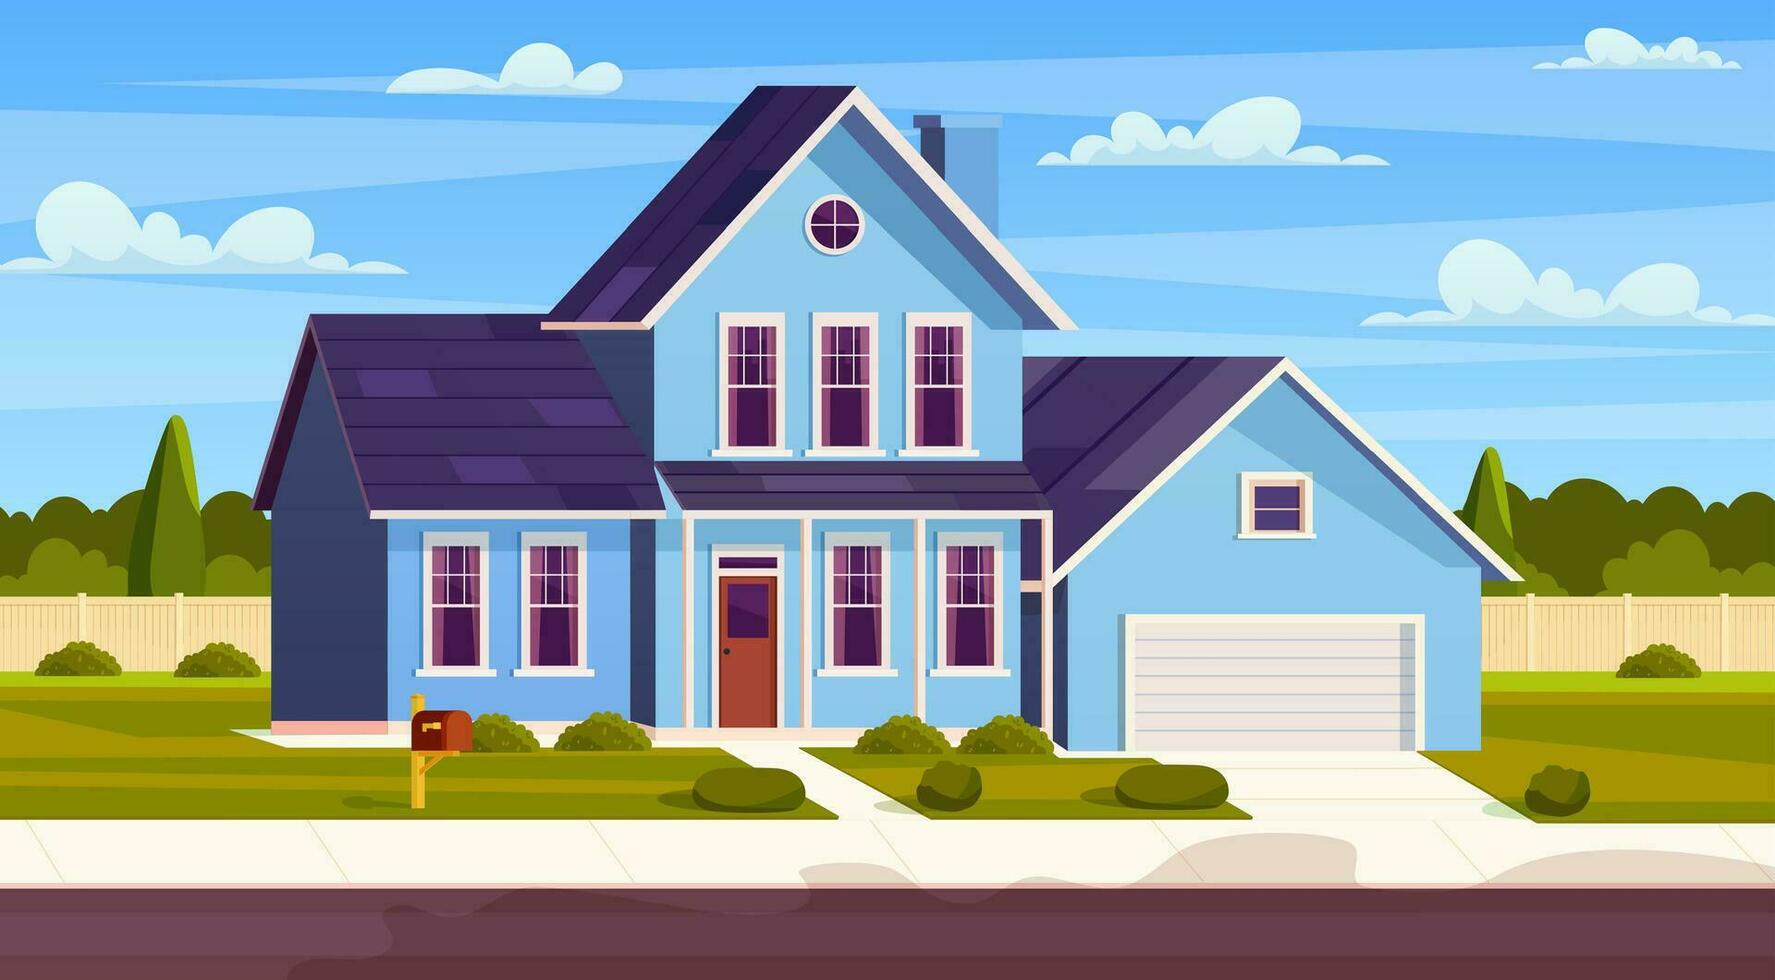 Suburban house, residential cottage, real estate countryside building exterior. Suburban home facade with garden and lawn and garage. Vector illustration in flat style